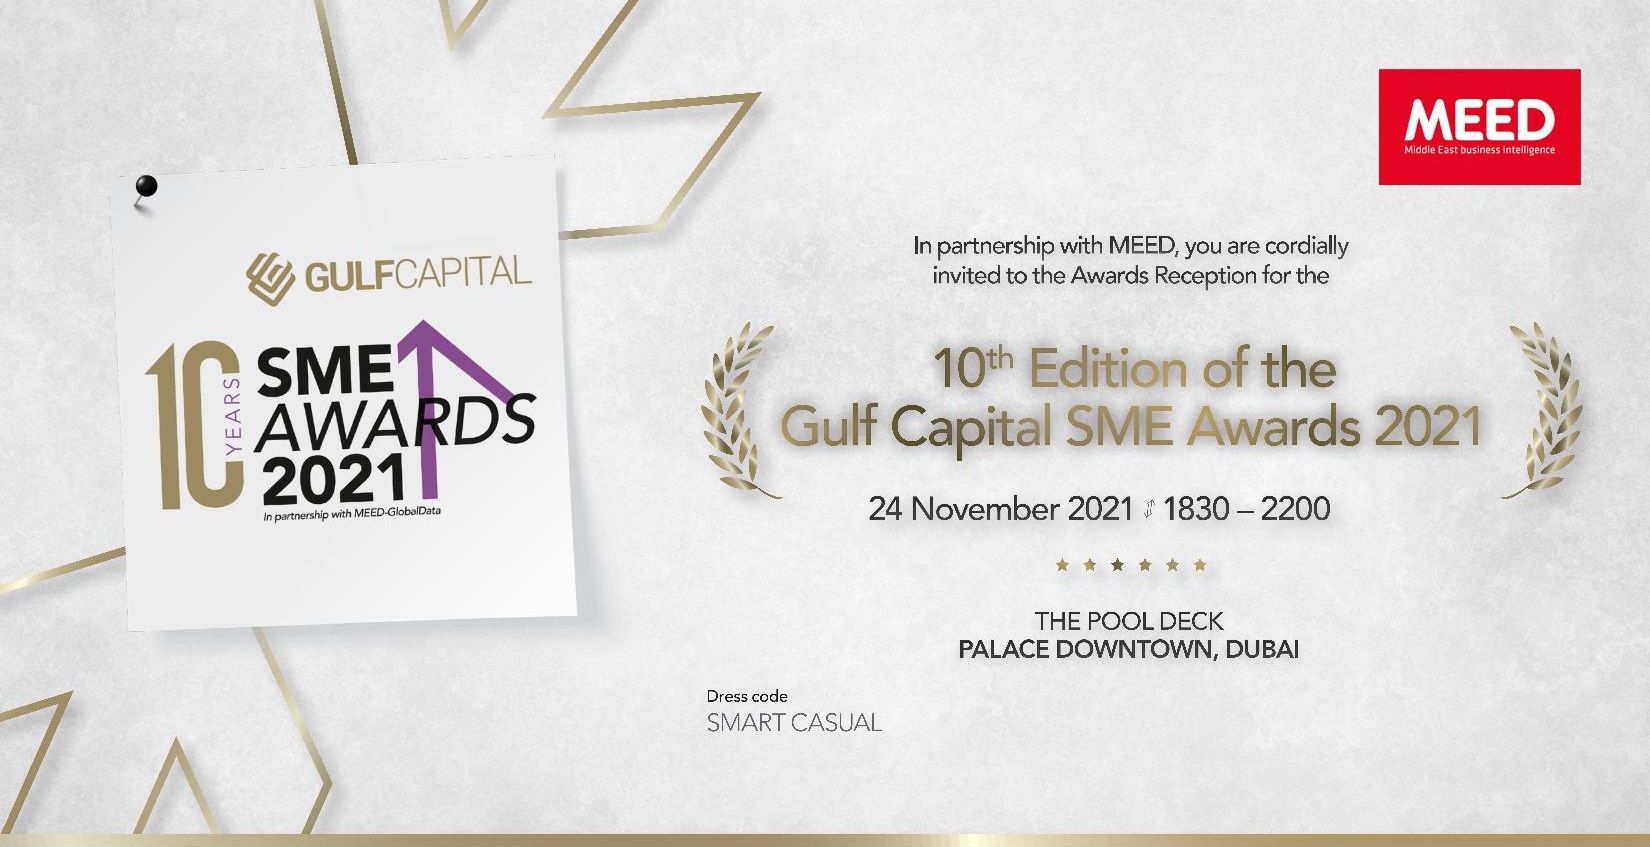  Qarar highly commended at Gulf Capital SME Awards 2021 